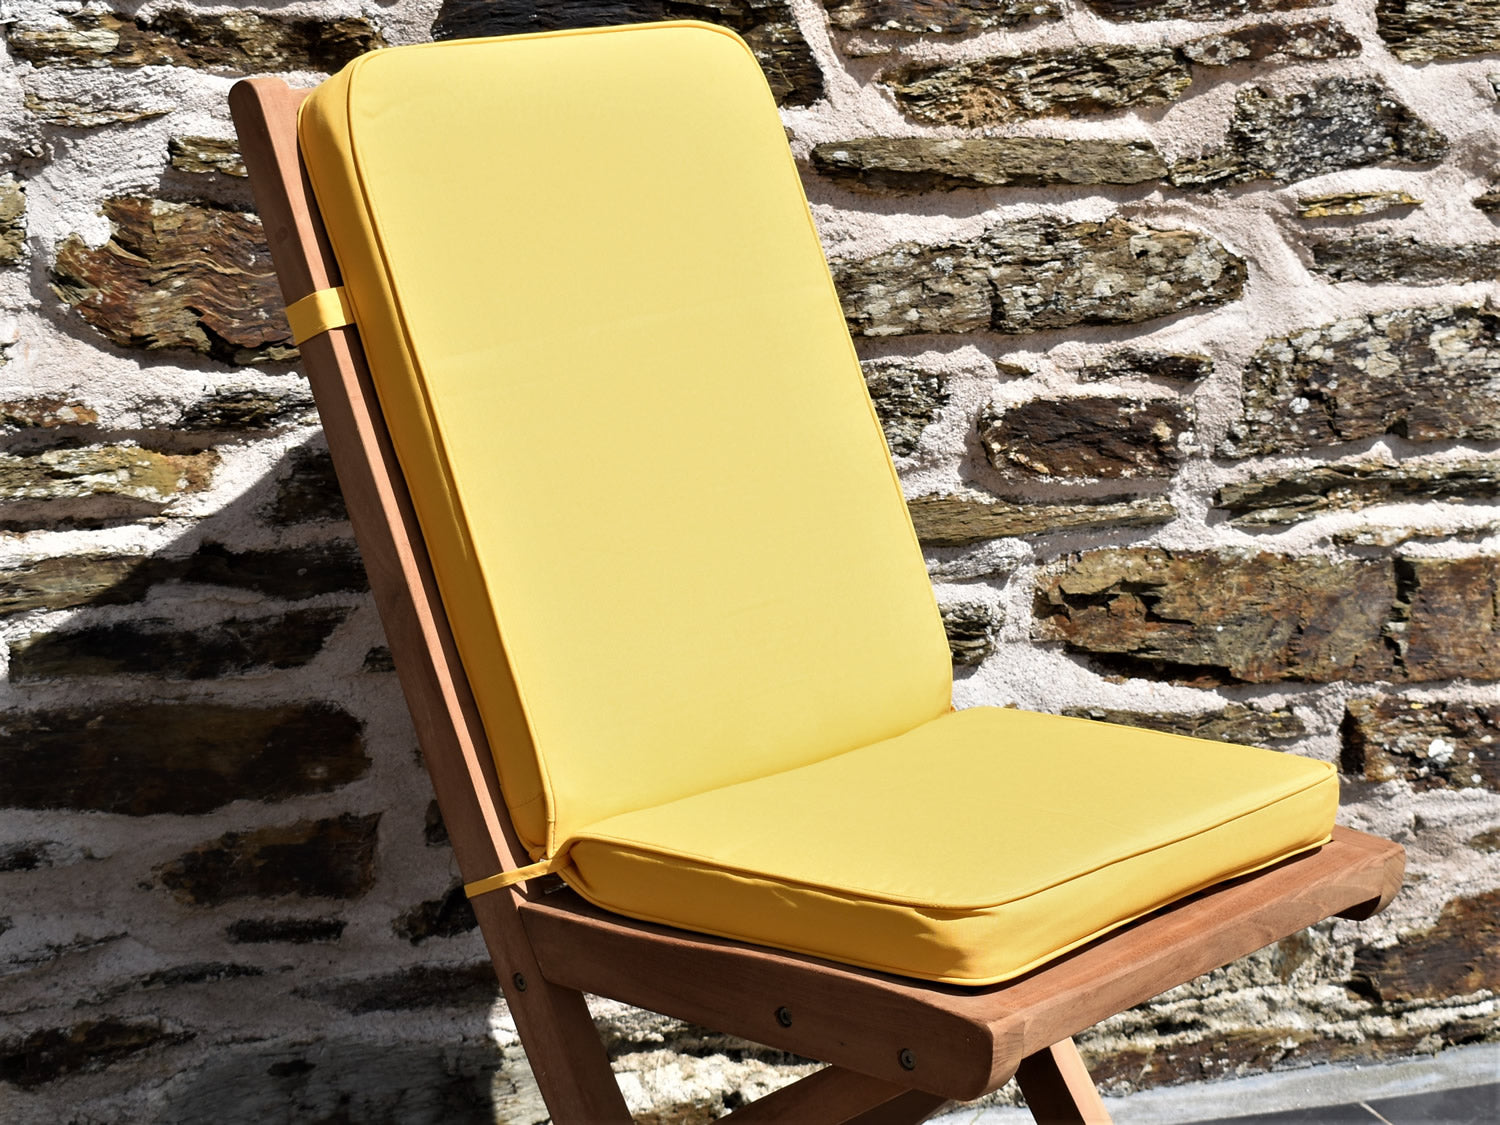 close-up detail of yellow folding seat pad and back garden chair cushion